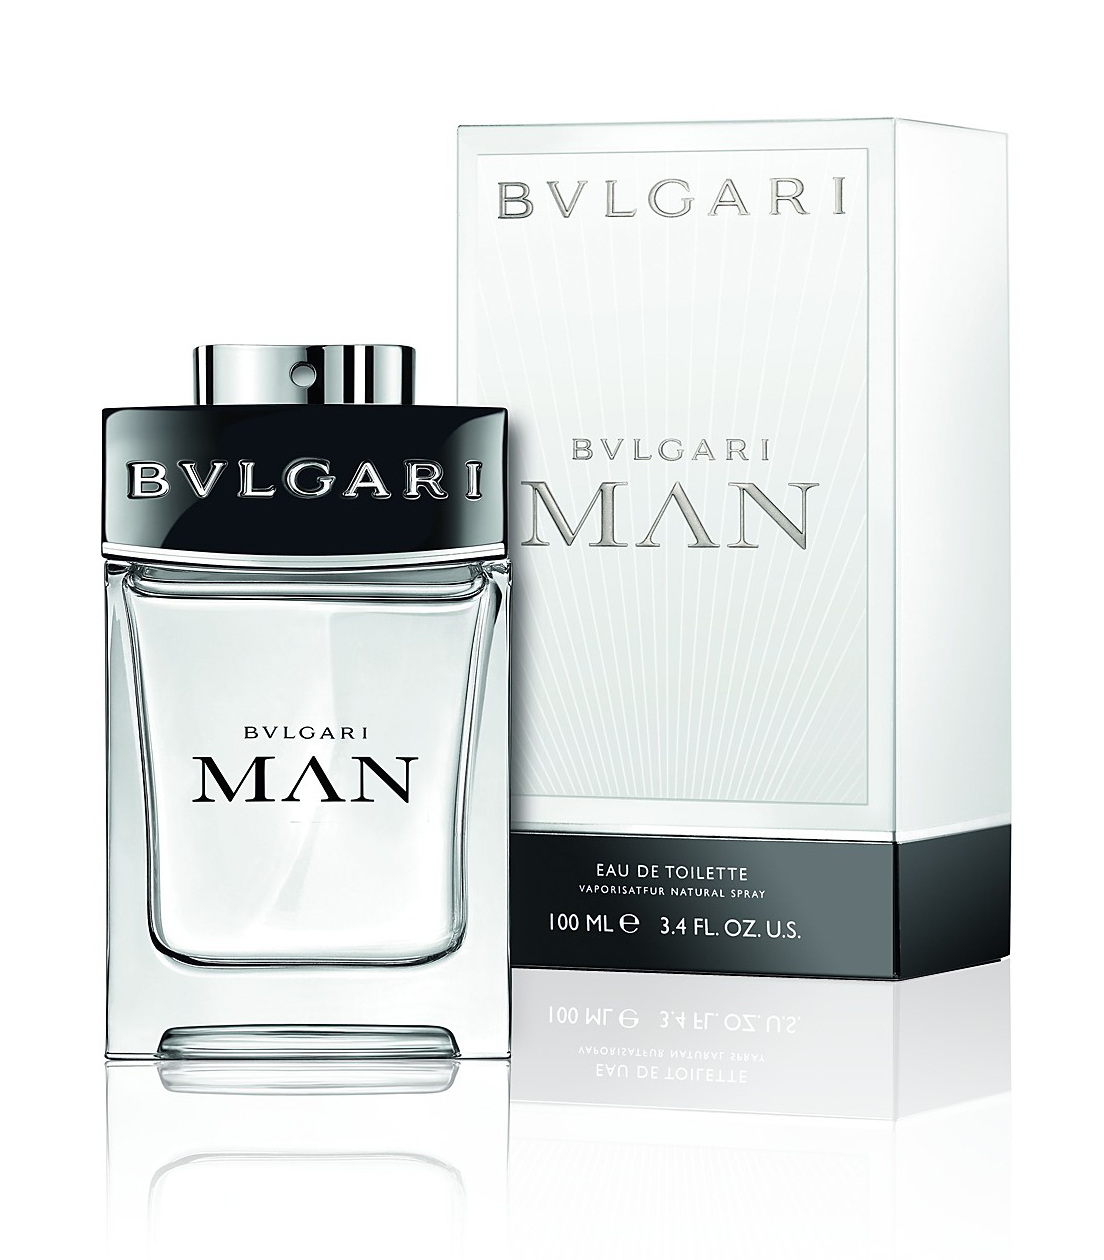 The Face of Beauty - Celebrity Fragrance: Clive Owen for Bvlgari Man